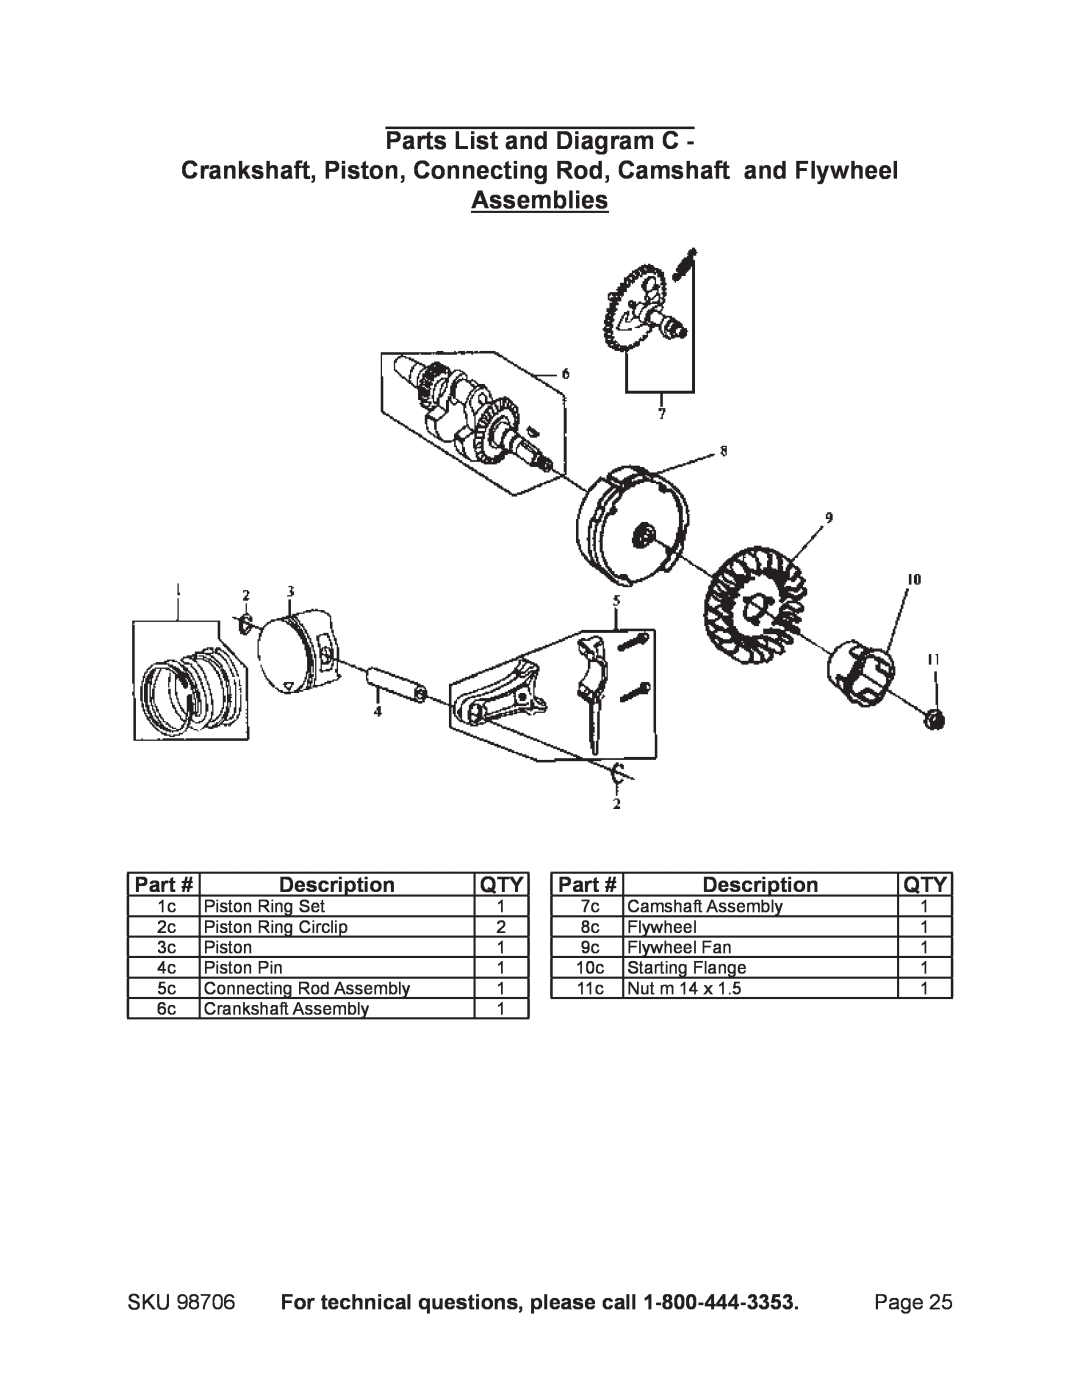 Chicago Electric 98706 manual Part #, Description, For technical questions, please call 